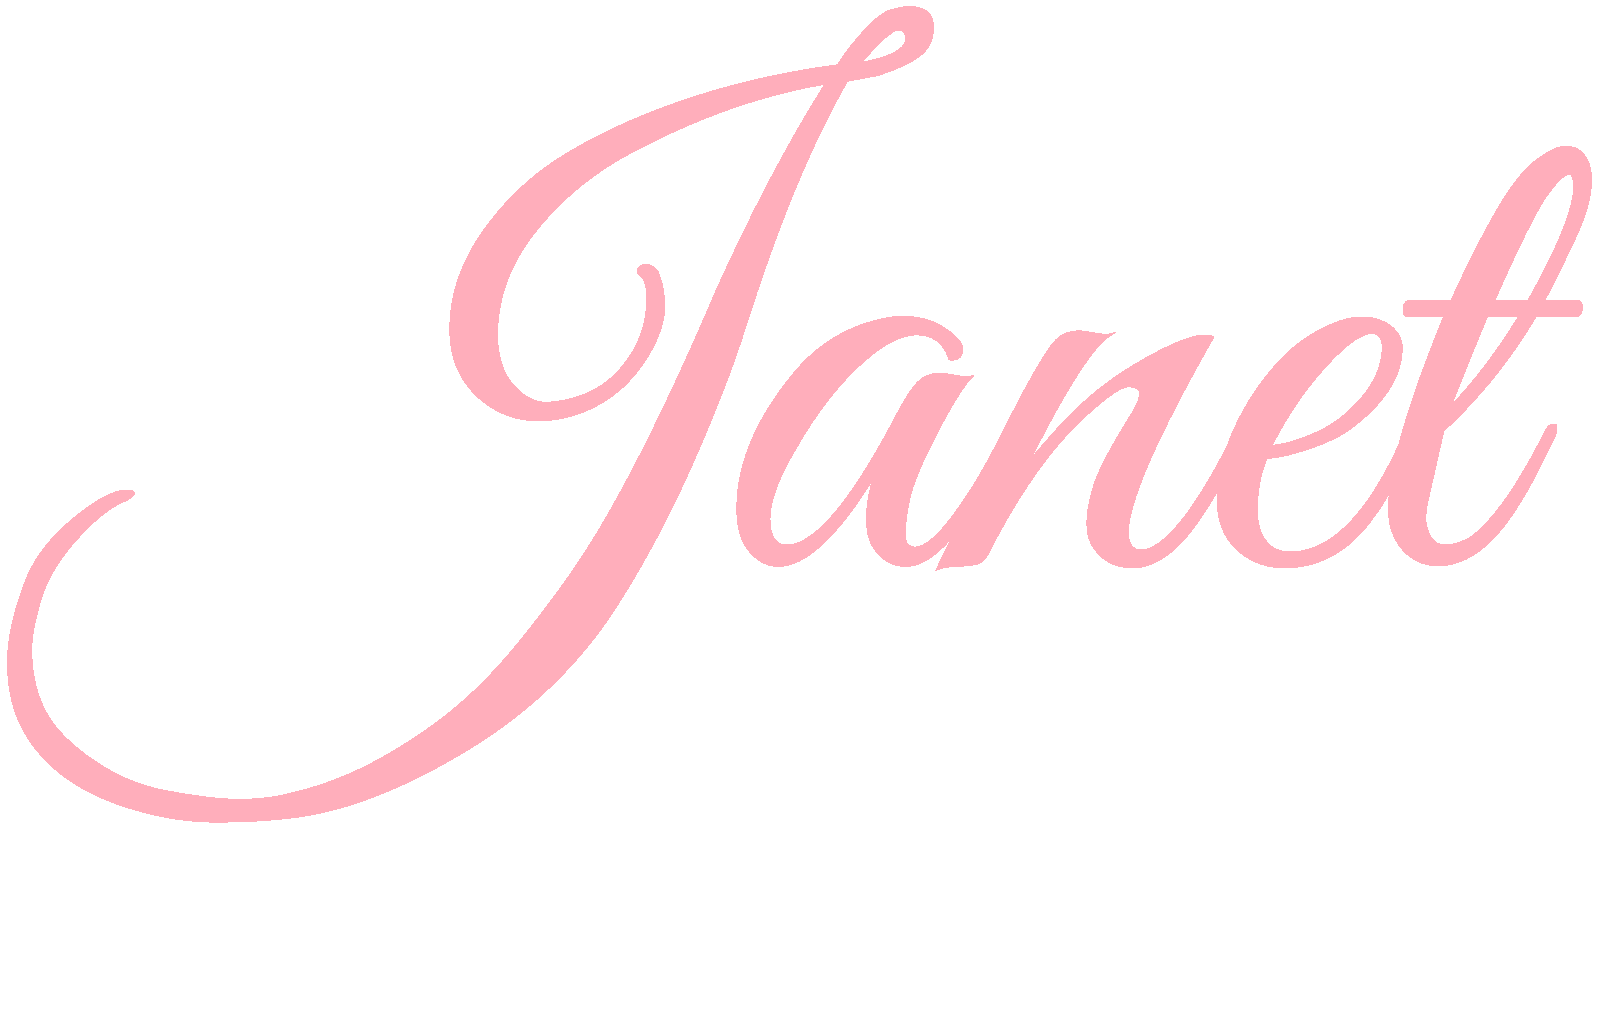 Janet Maxwell, Real Estate Professional